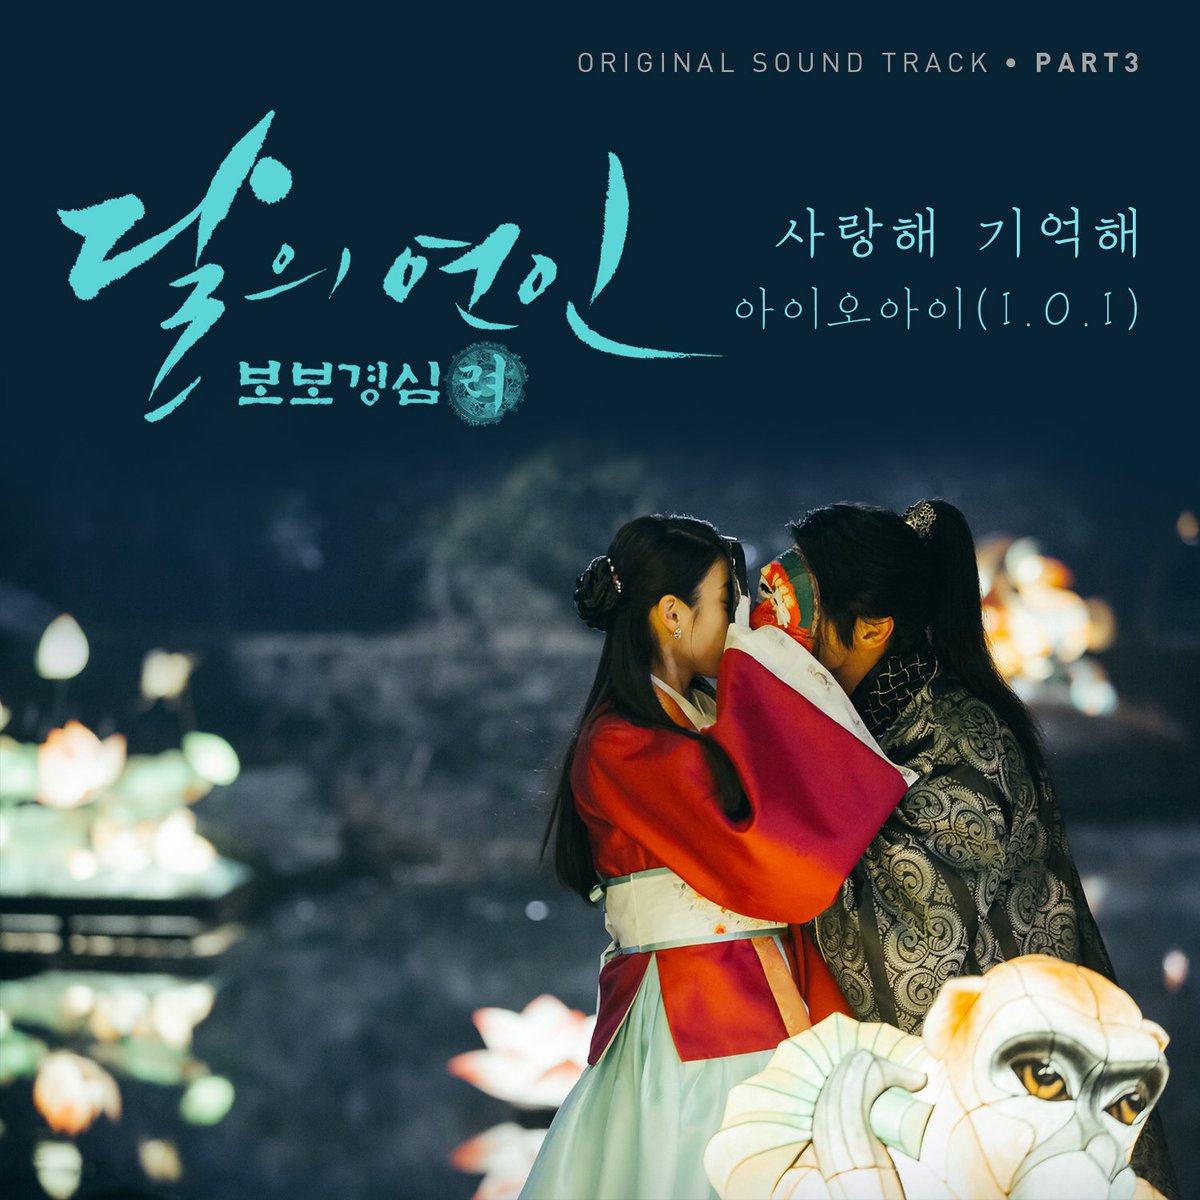 Can You Hear My Heart Epik High Mp3 Download Scarlet Heart Ryeo On Twitter All With You By Snsd Taeyeon Https T Co Qbqgk0zmdv Can You Hear My Heart By Epik High Ft Lee Hi Https T Co Pbopobmrxy Moonlovers Https T Co 1dbfqsb9fz